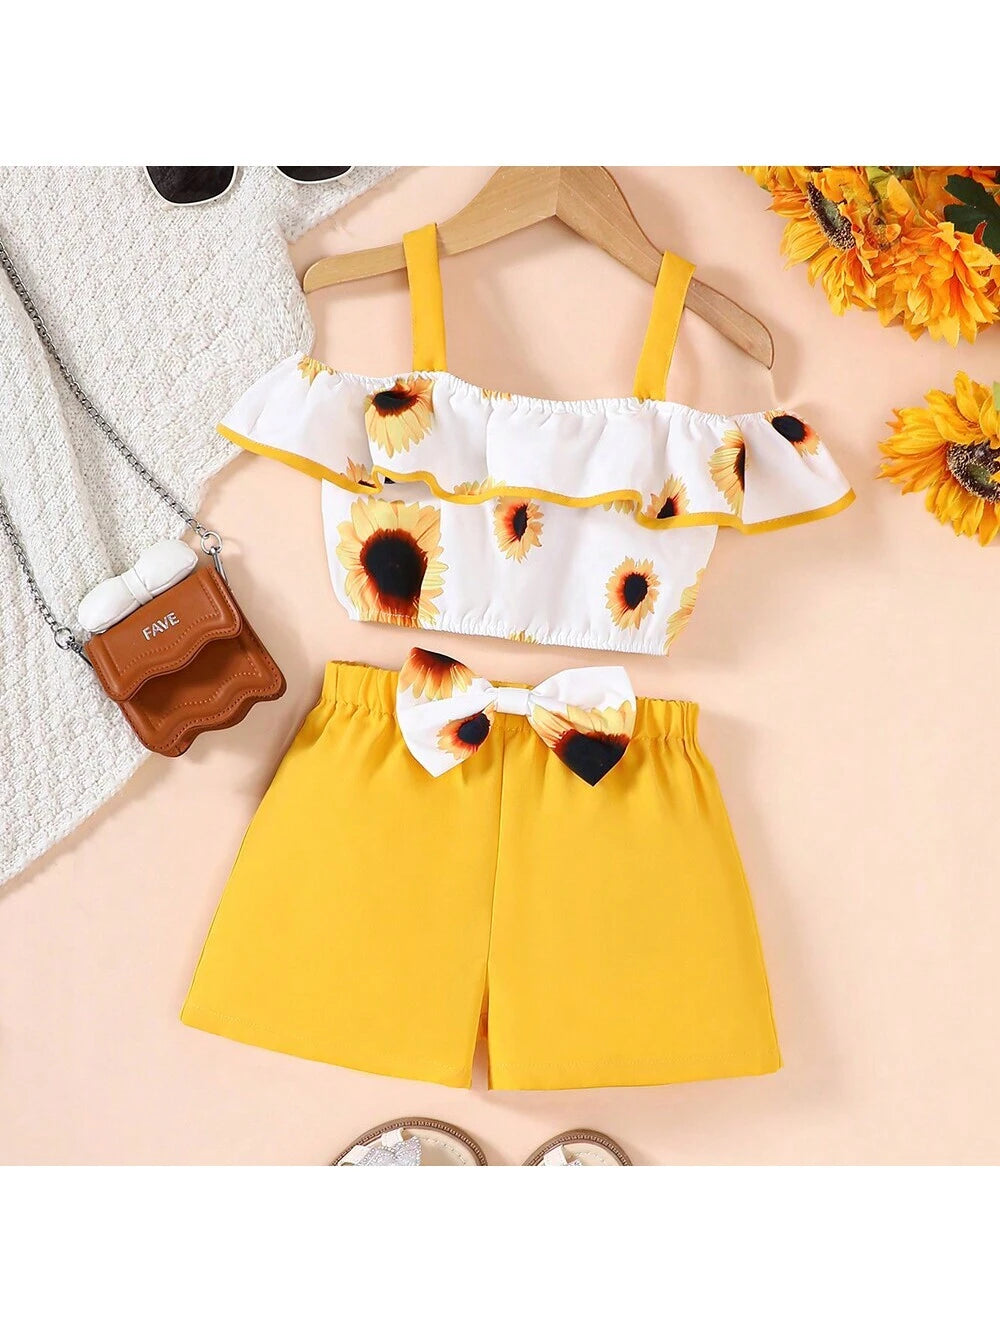 Girls" Summer Sunflower Printed Tank Top With Bowknot Shorts Vacation Style 2pcs/Set Outfits